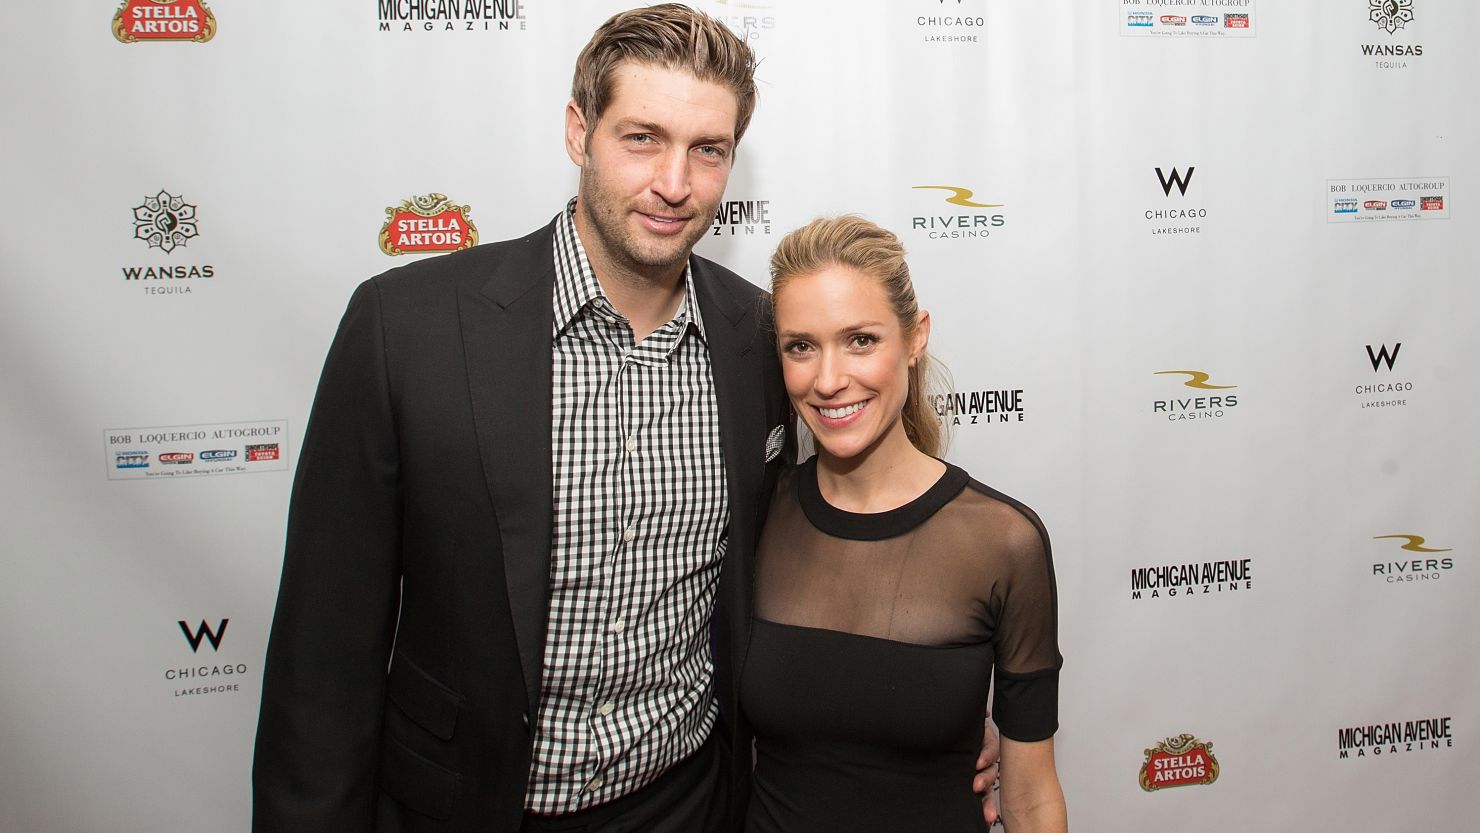 Jay Cutler and his wife, Kristin Cavallari, attend a fashion event in Chicago in 2014.